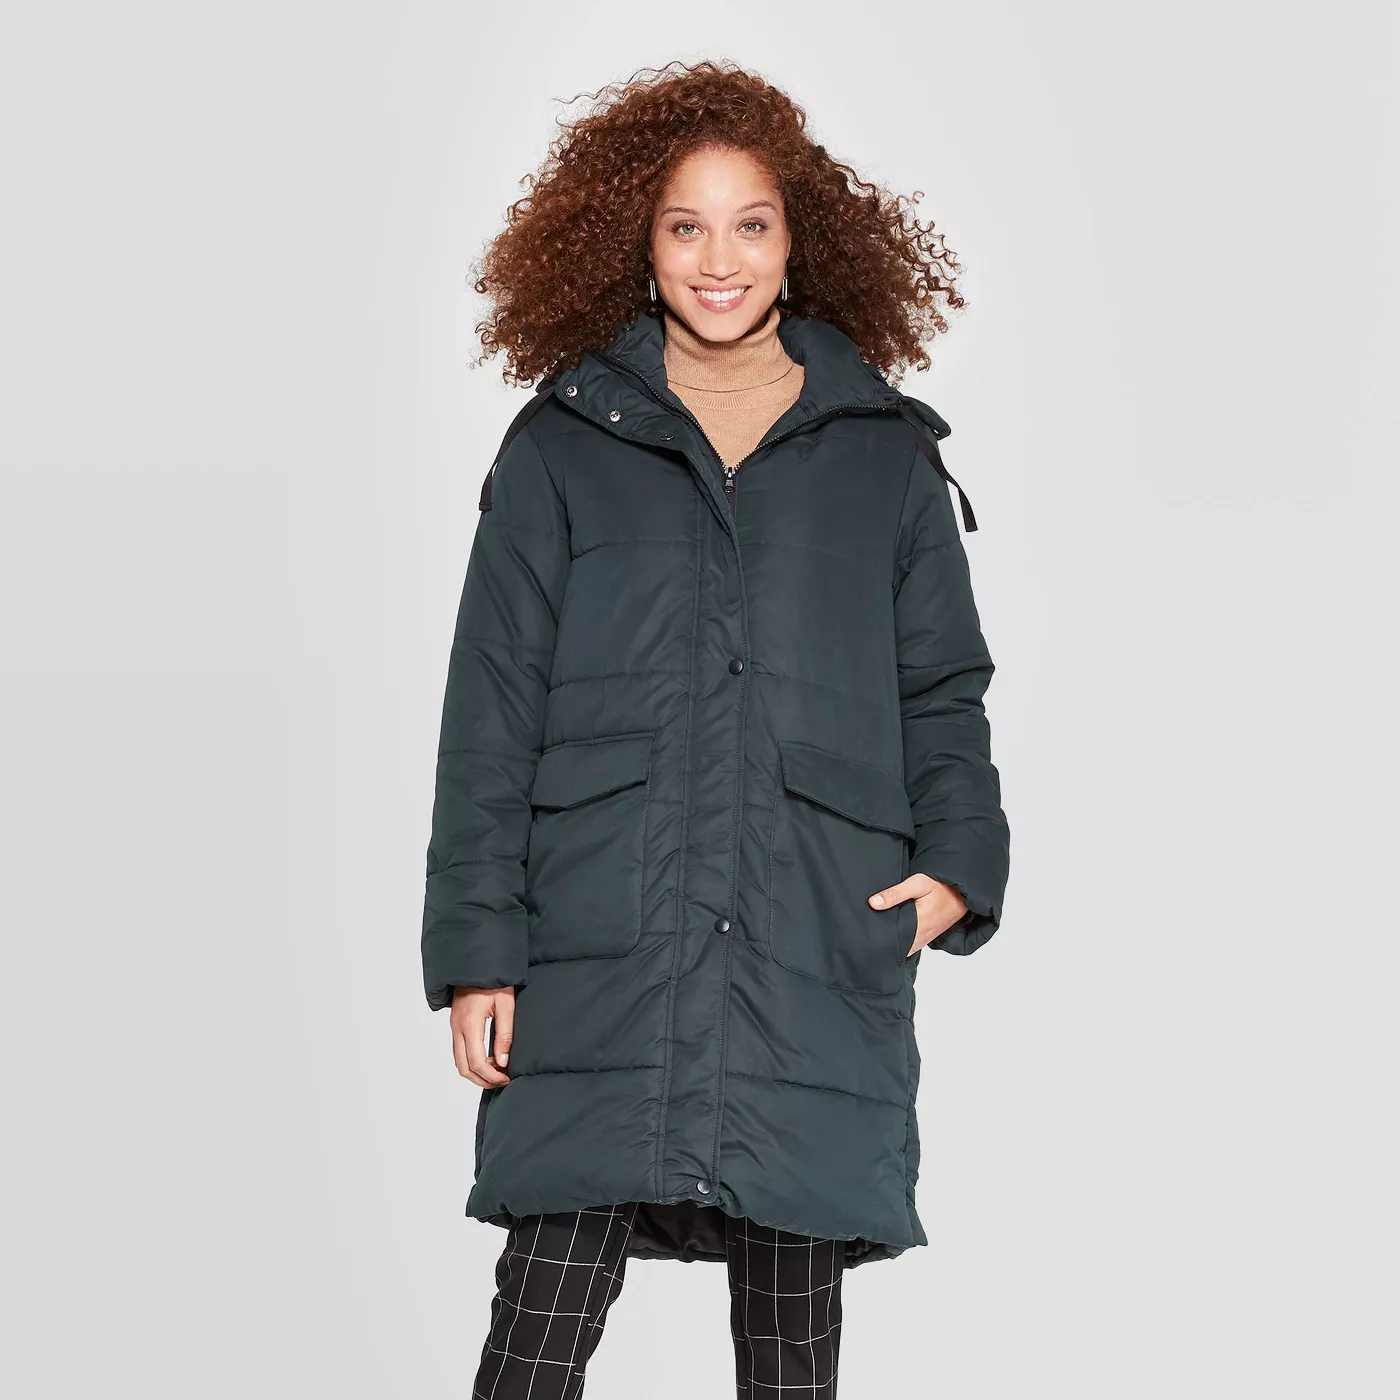 Women's Quilted Puffer Jacket - A New Day™ - image 1 of 2